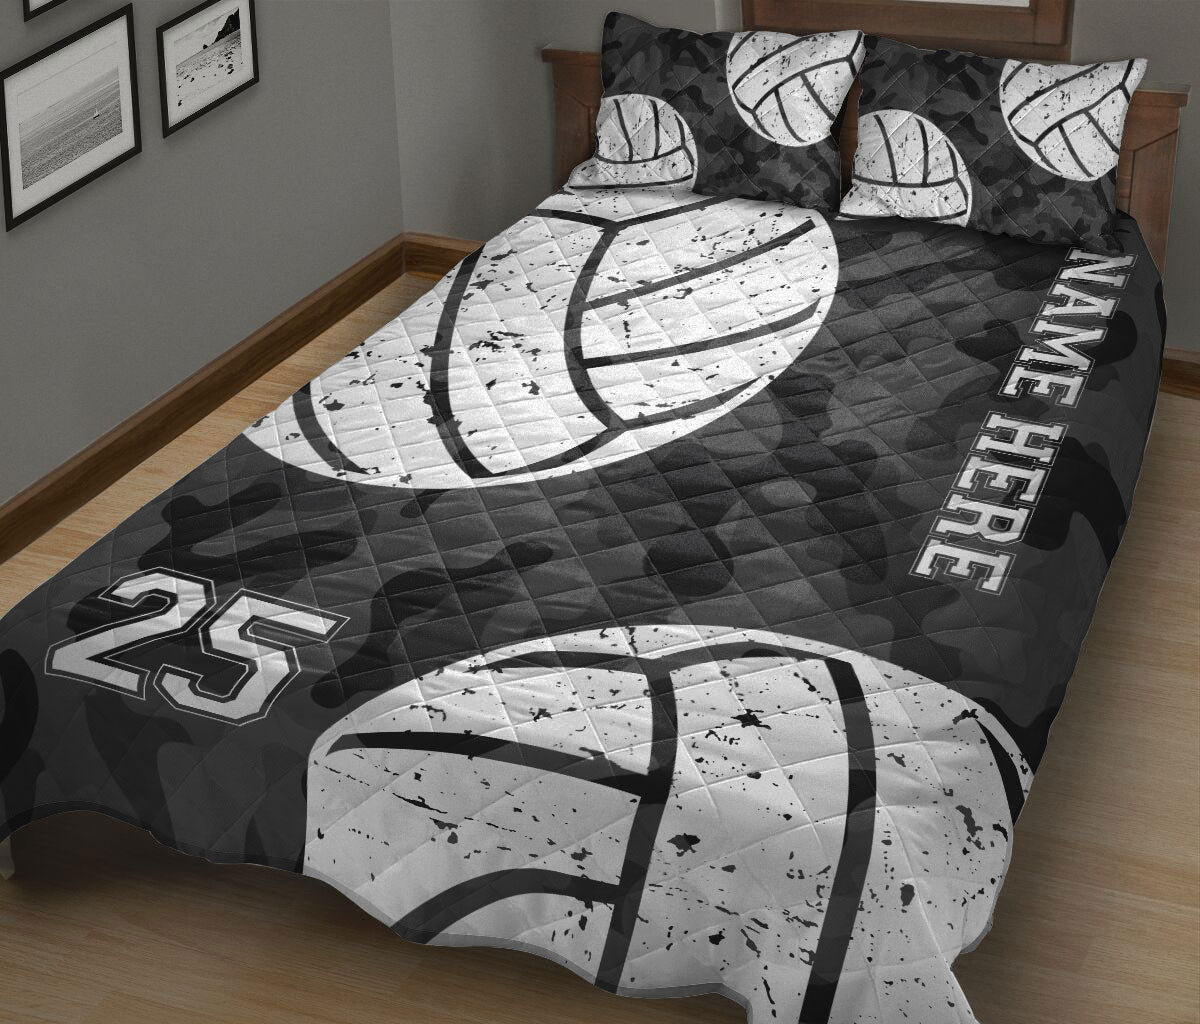 Ohaprints-Quilt-Bed-Set-Pillowcase-Volleyball-Ball-Black-Camo-Pattern-Sports-Fan-Gift-Custom-Personalized-Name-Blanket-Bedspread-Bedding-1959-King (90'' x 100'')